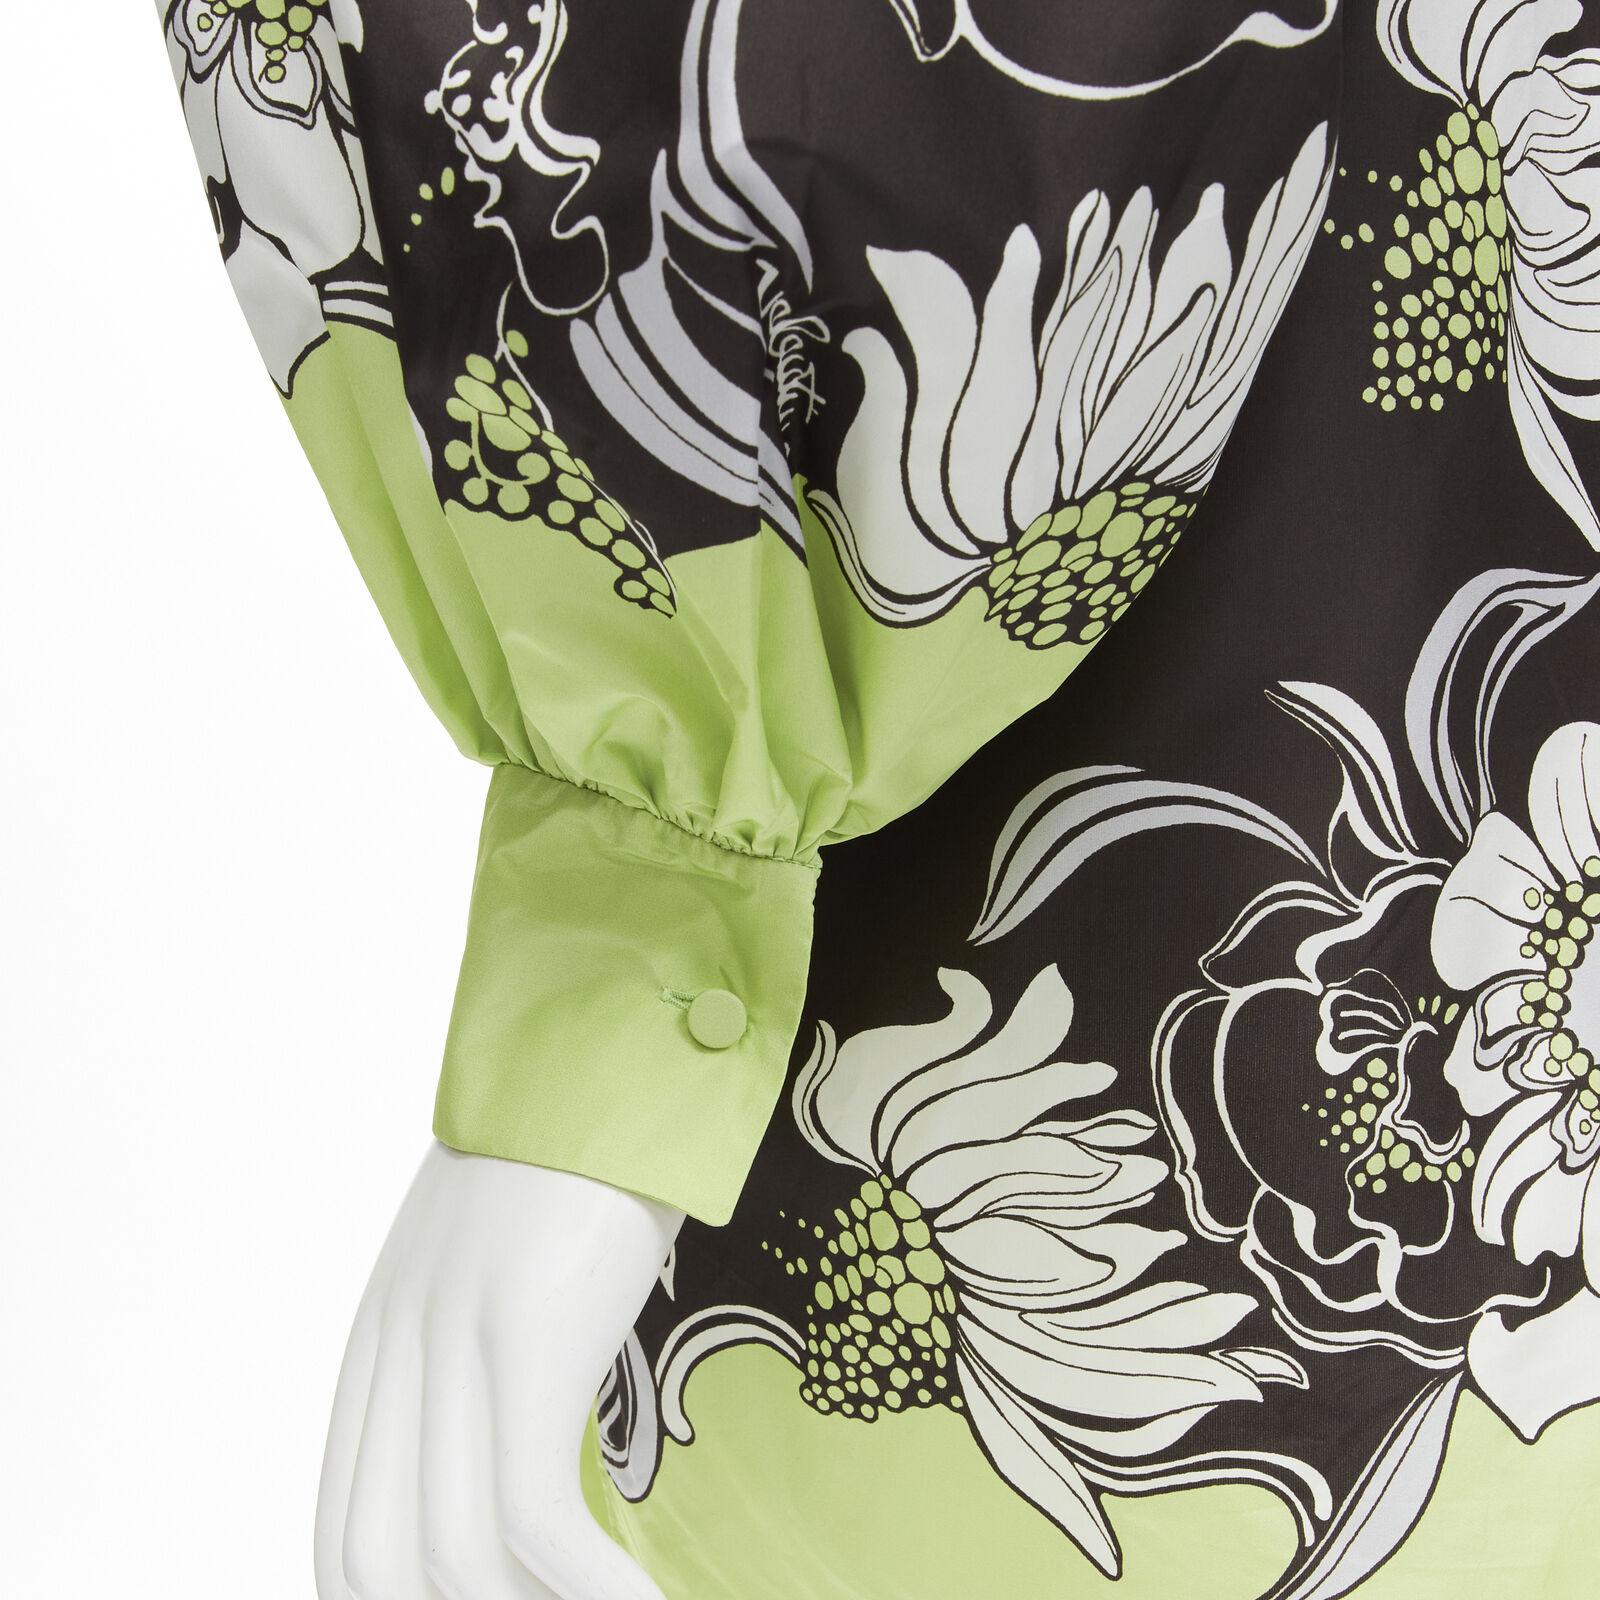 VALENTINO 2022 100% silk green brown floral print puff sleeve short dress IT38 S
Reference: AAWC/A00017
Brand: Valentino
Designer: Pier Paolo Piccioli
Collection: 2022 - Runway
Material: 100% Silk
Color: Green, Brown
Pattern: Floral
Lining: